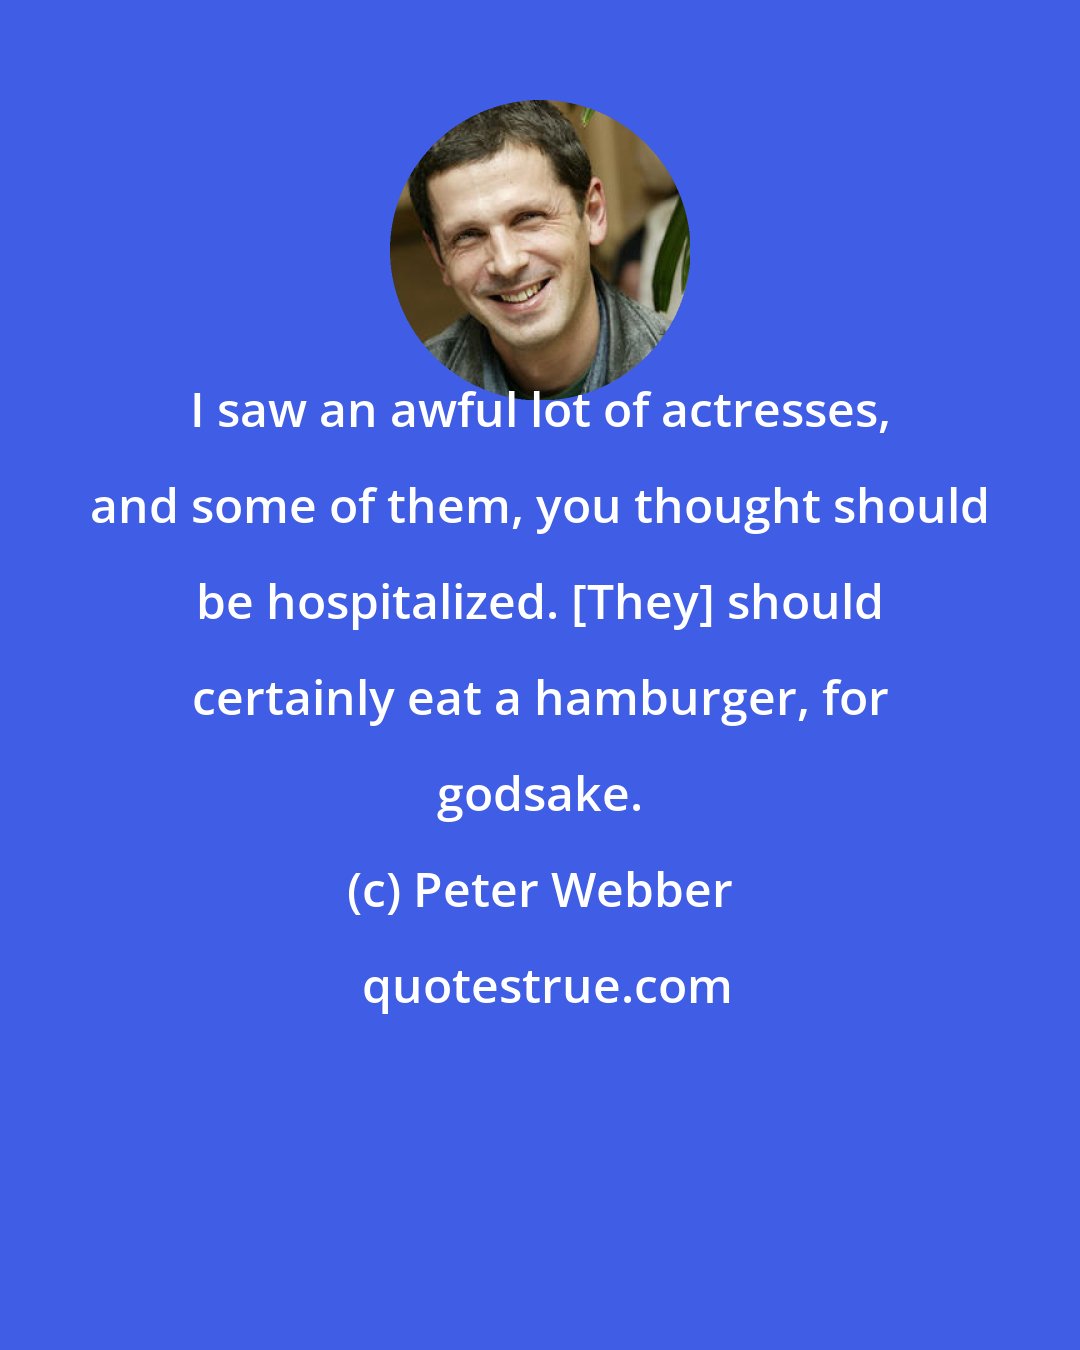 Peter Webber: I saw an awful lot of actresses, and some of them, you thought should be hospitalized. [They] should certainly eat a hamburger, for godsake.